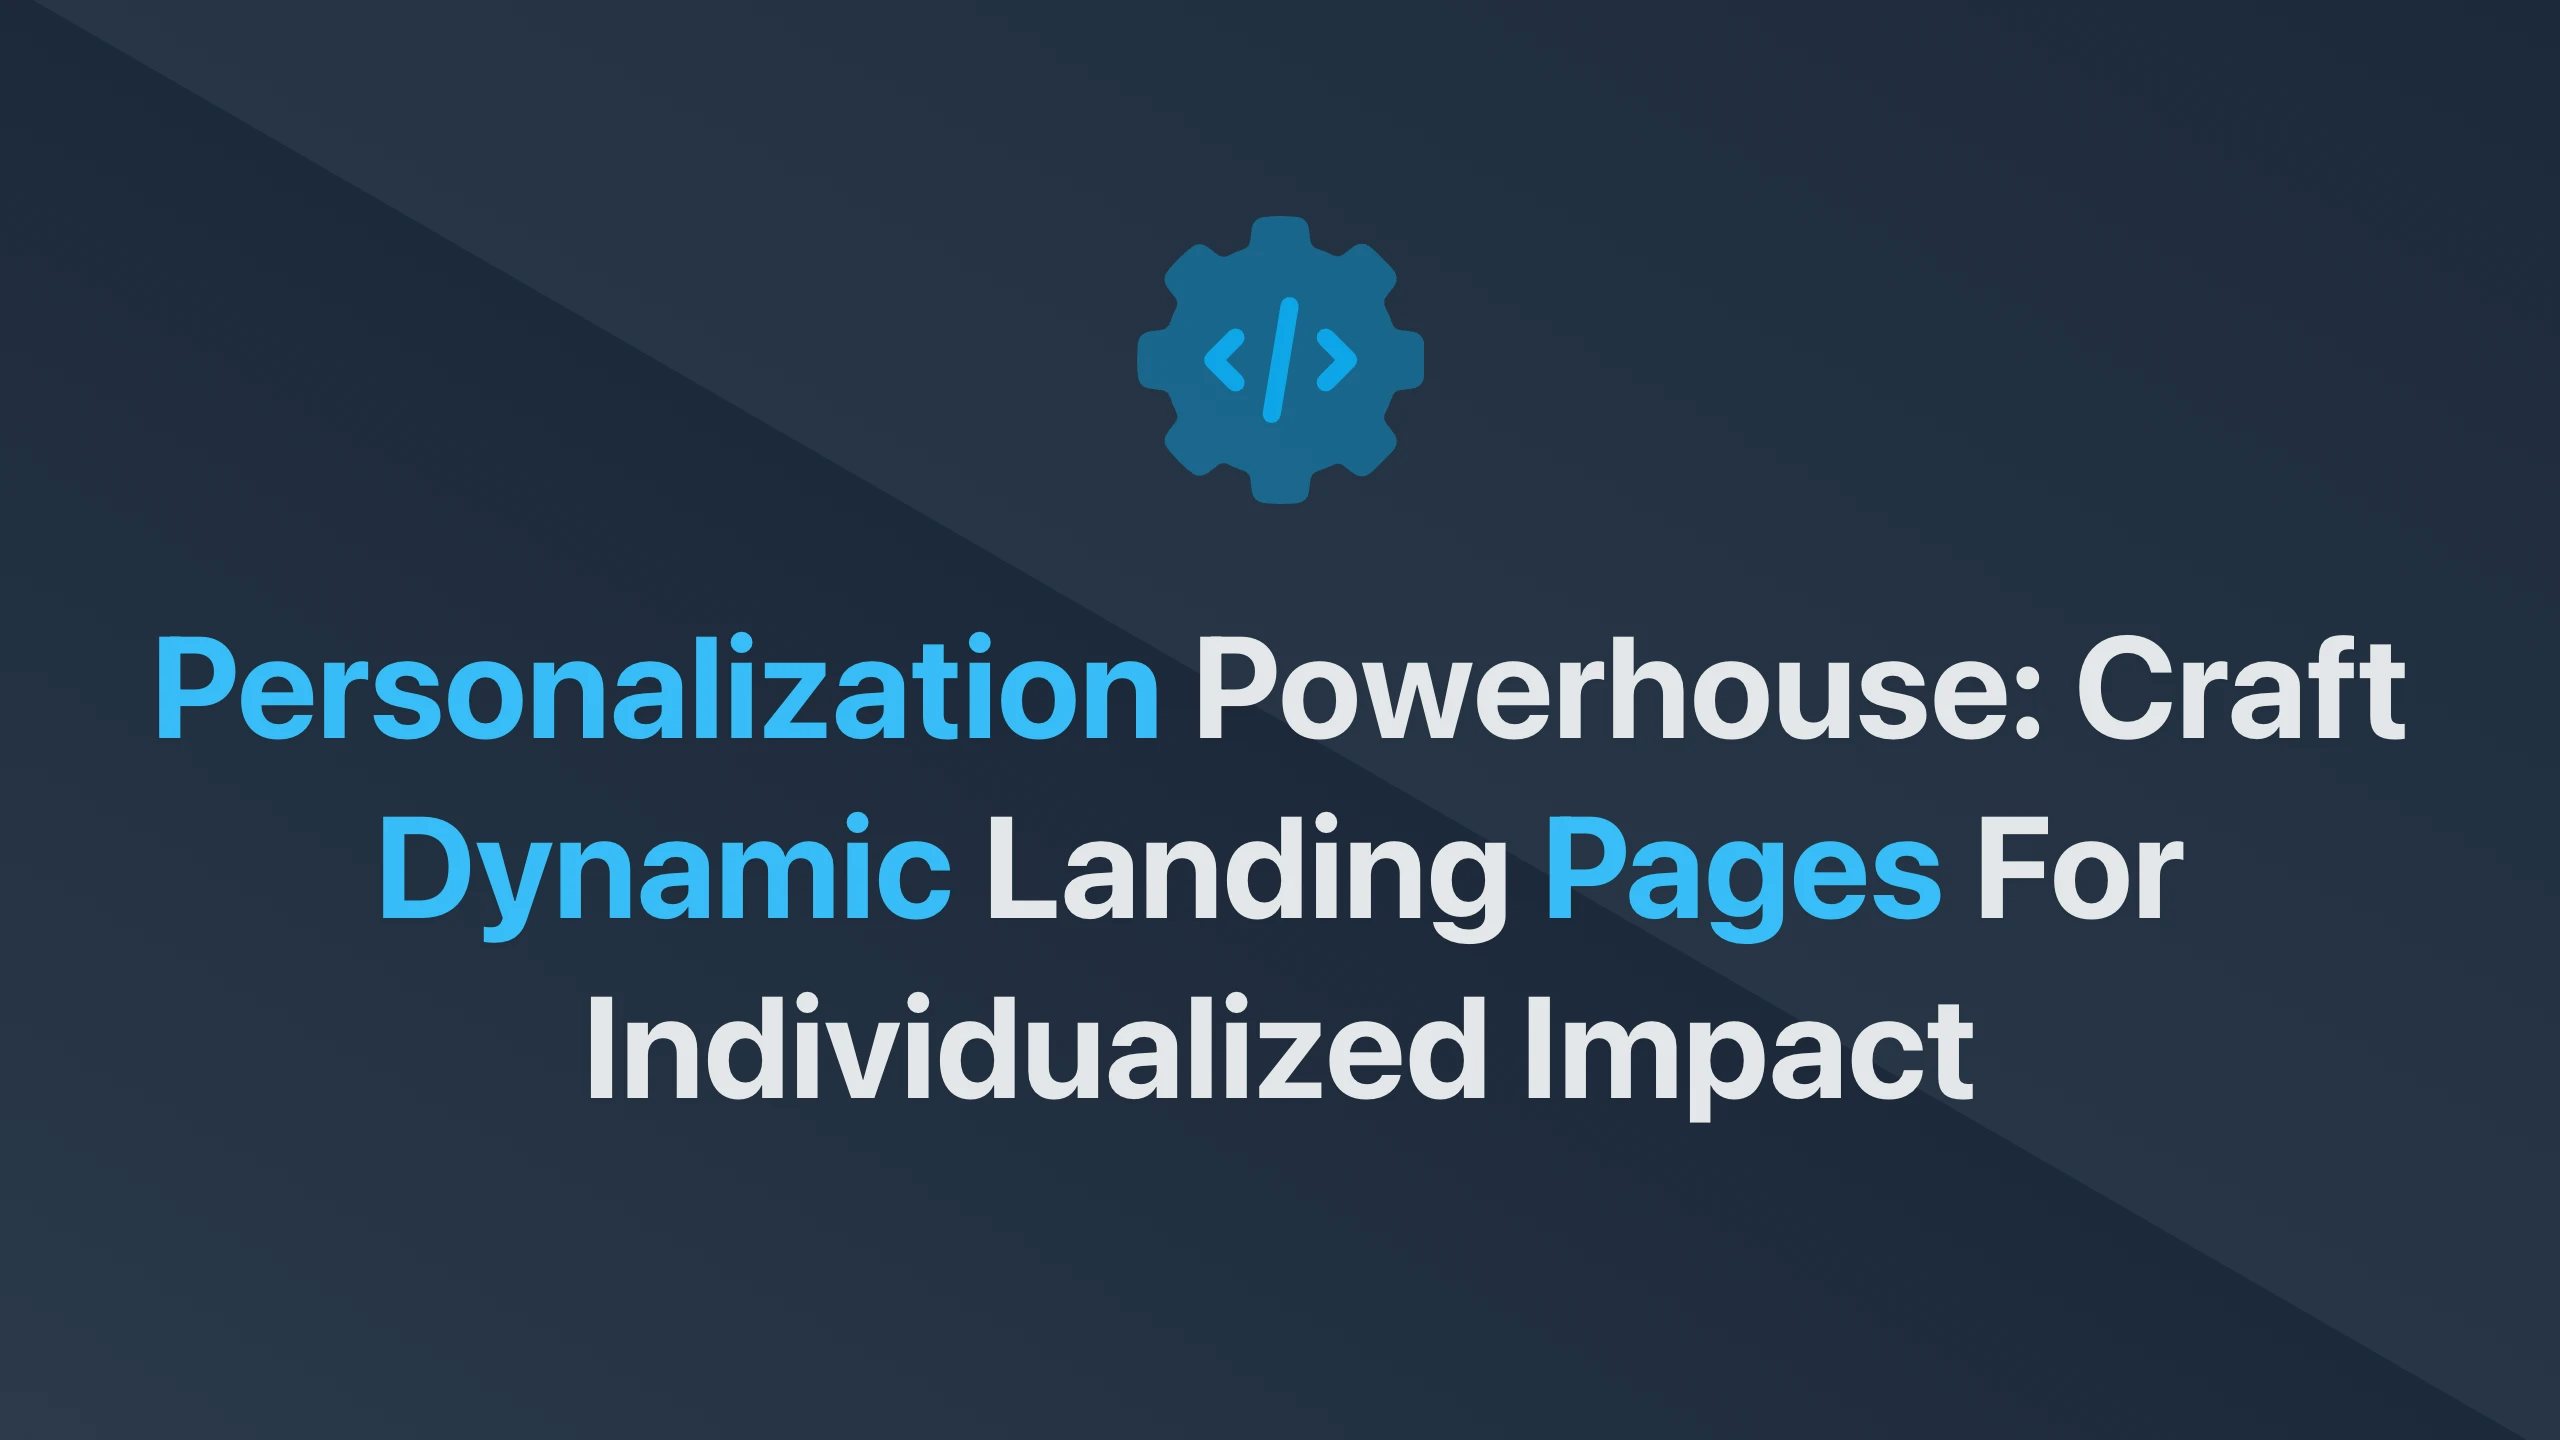 Cover Image for Personalization Powerhouse: Craft Dynamic Landing Pages for Individualized Impact